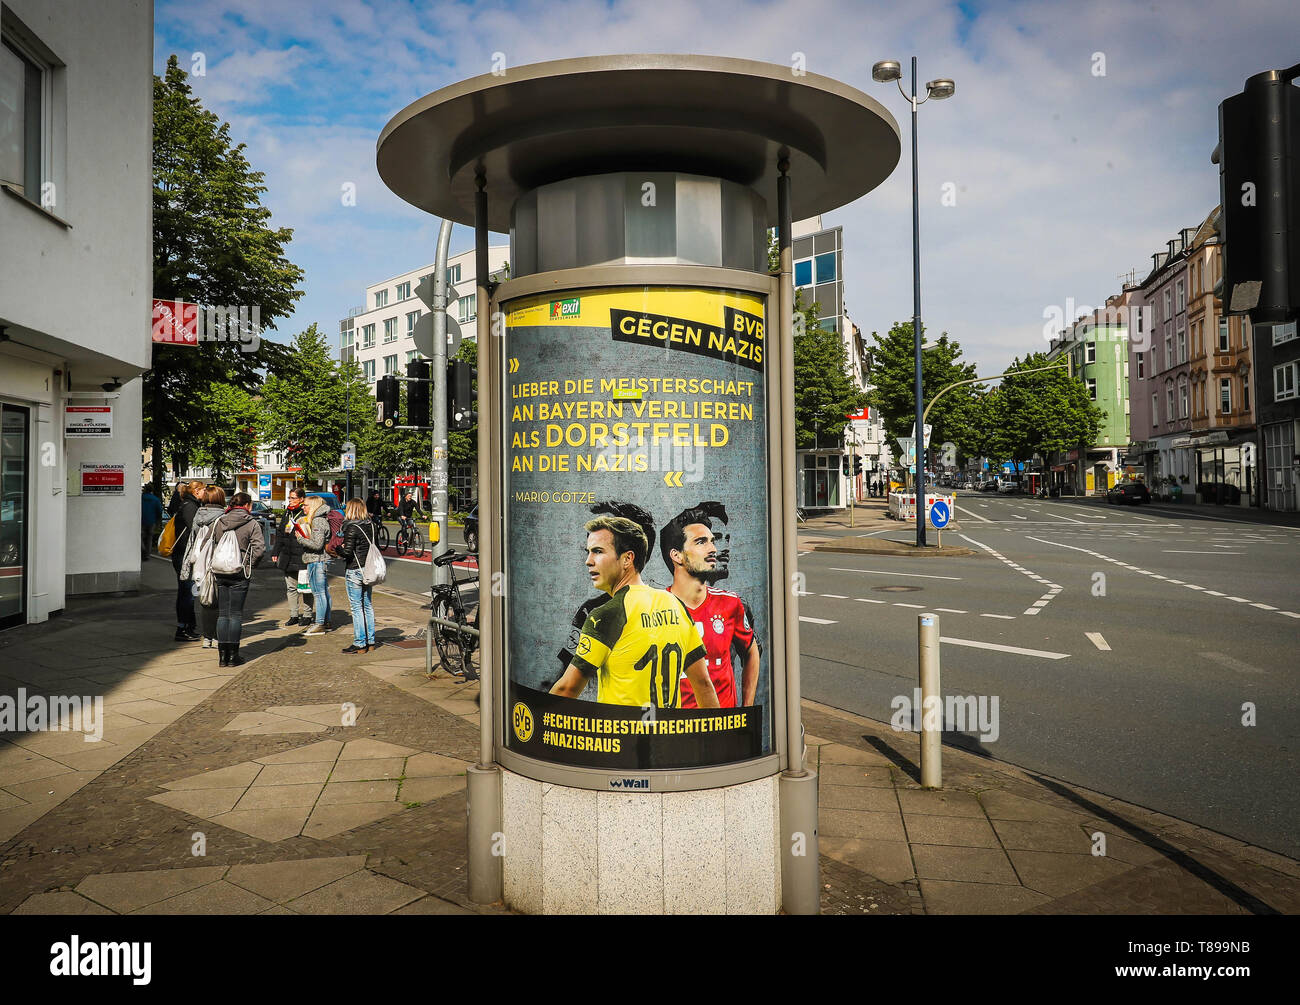 11 May 2019, North Rhine-Westphalia, Dortmund: An illegally hung poster with photos of BvB players and the inscription 'Lieber die Meisterschaft an Bayern verlieren als Dorstfeld an die Nazis' can be seen on an advertising pillar on the way to the stadium. Unknown persons had hung up posters with partly drastic confessions against Nazis in advertising showcases at several locations, which were attributed to players and the coach of Borussia Dortmund. Photo: Stephan Schütze/dpa - ATTENTION: Only for editorial use in connection with the current reporting on the poster campaign and only with comp Stock Photo